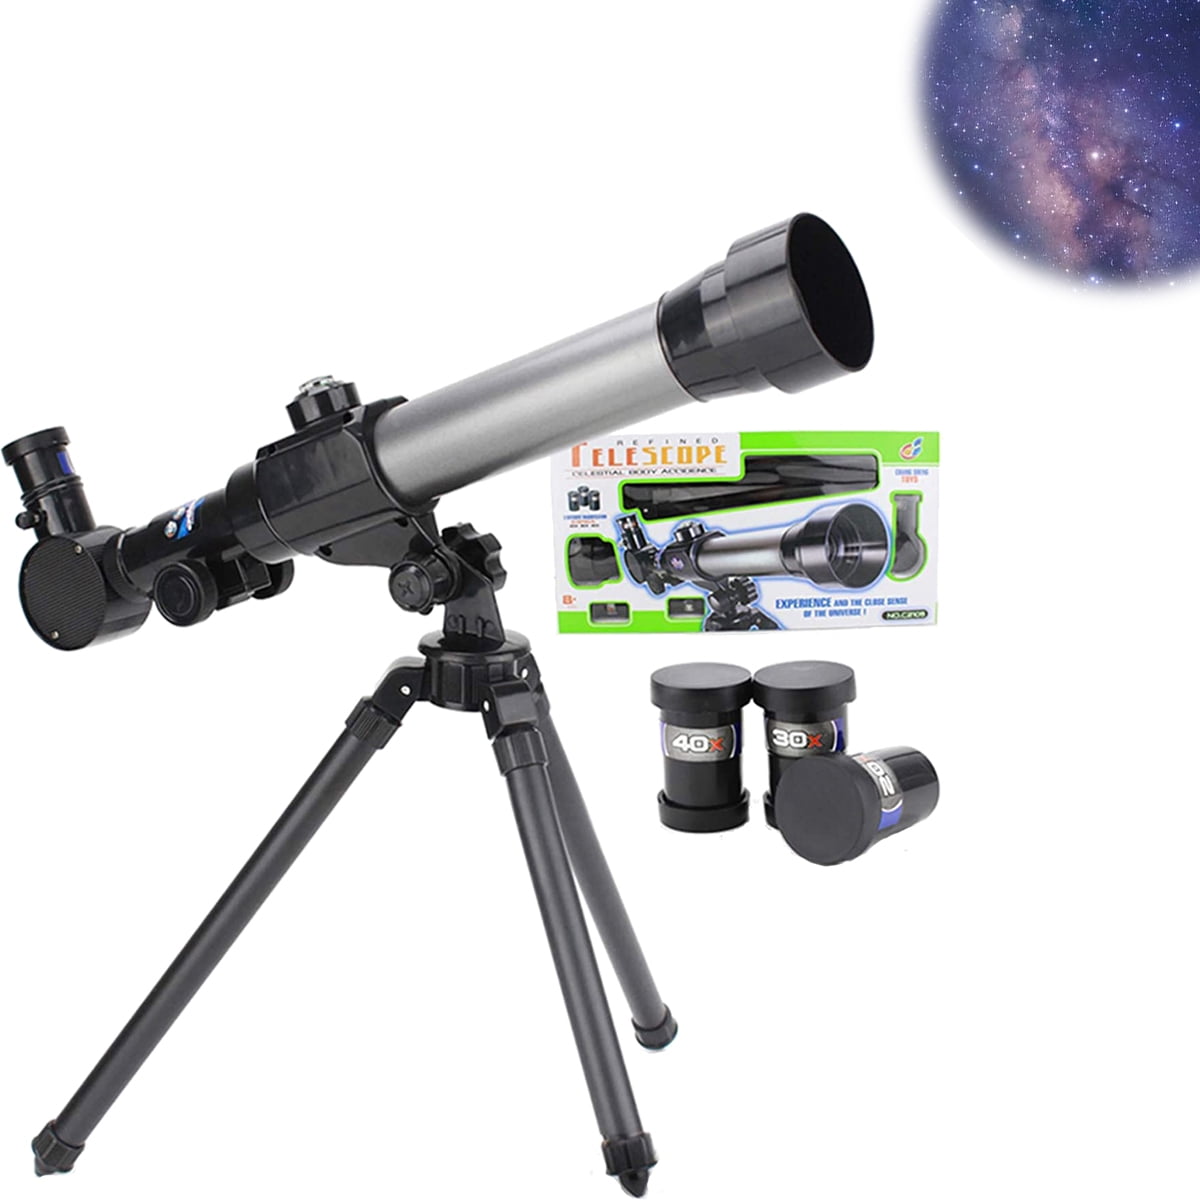 Astronomical Refractor Travel Telescope Telescope for Astronomy Stargazing Hd Deep Space Astronomy Telescopes with Tripod for Beginners Ideal Birthday Space Gift 